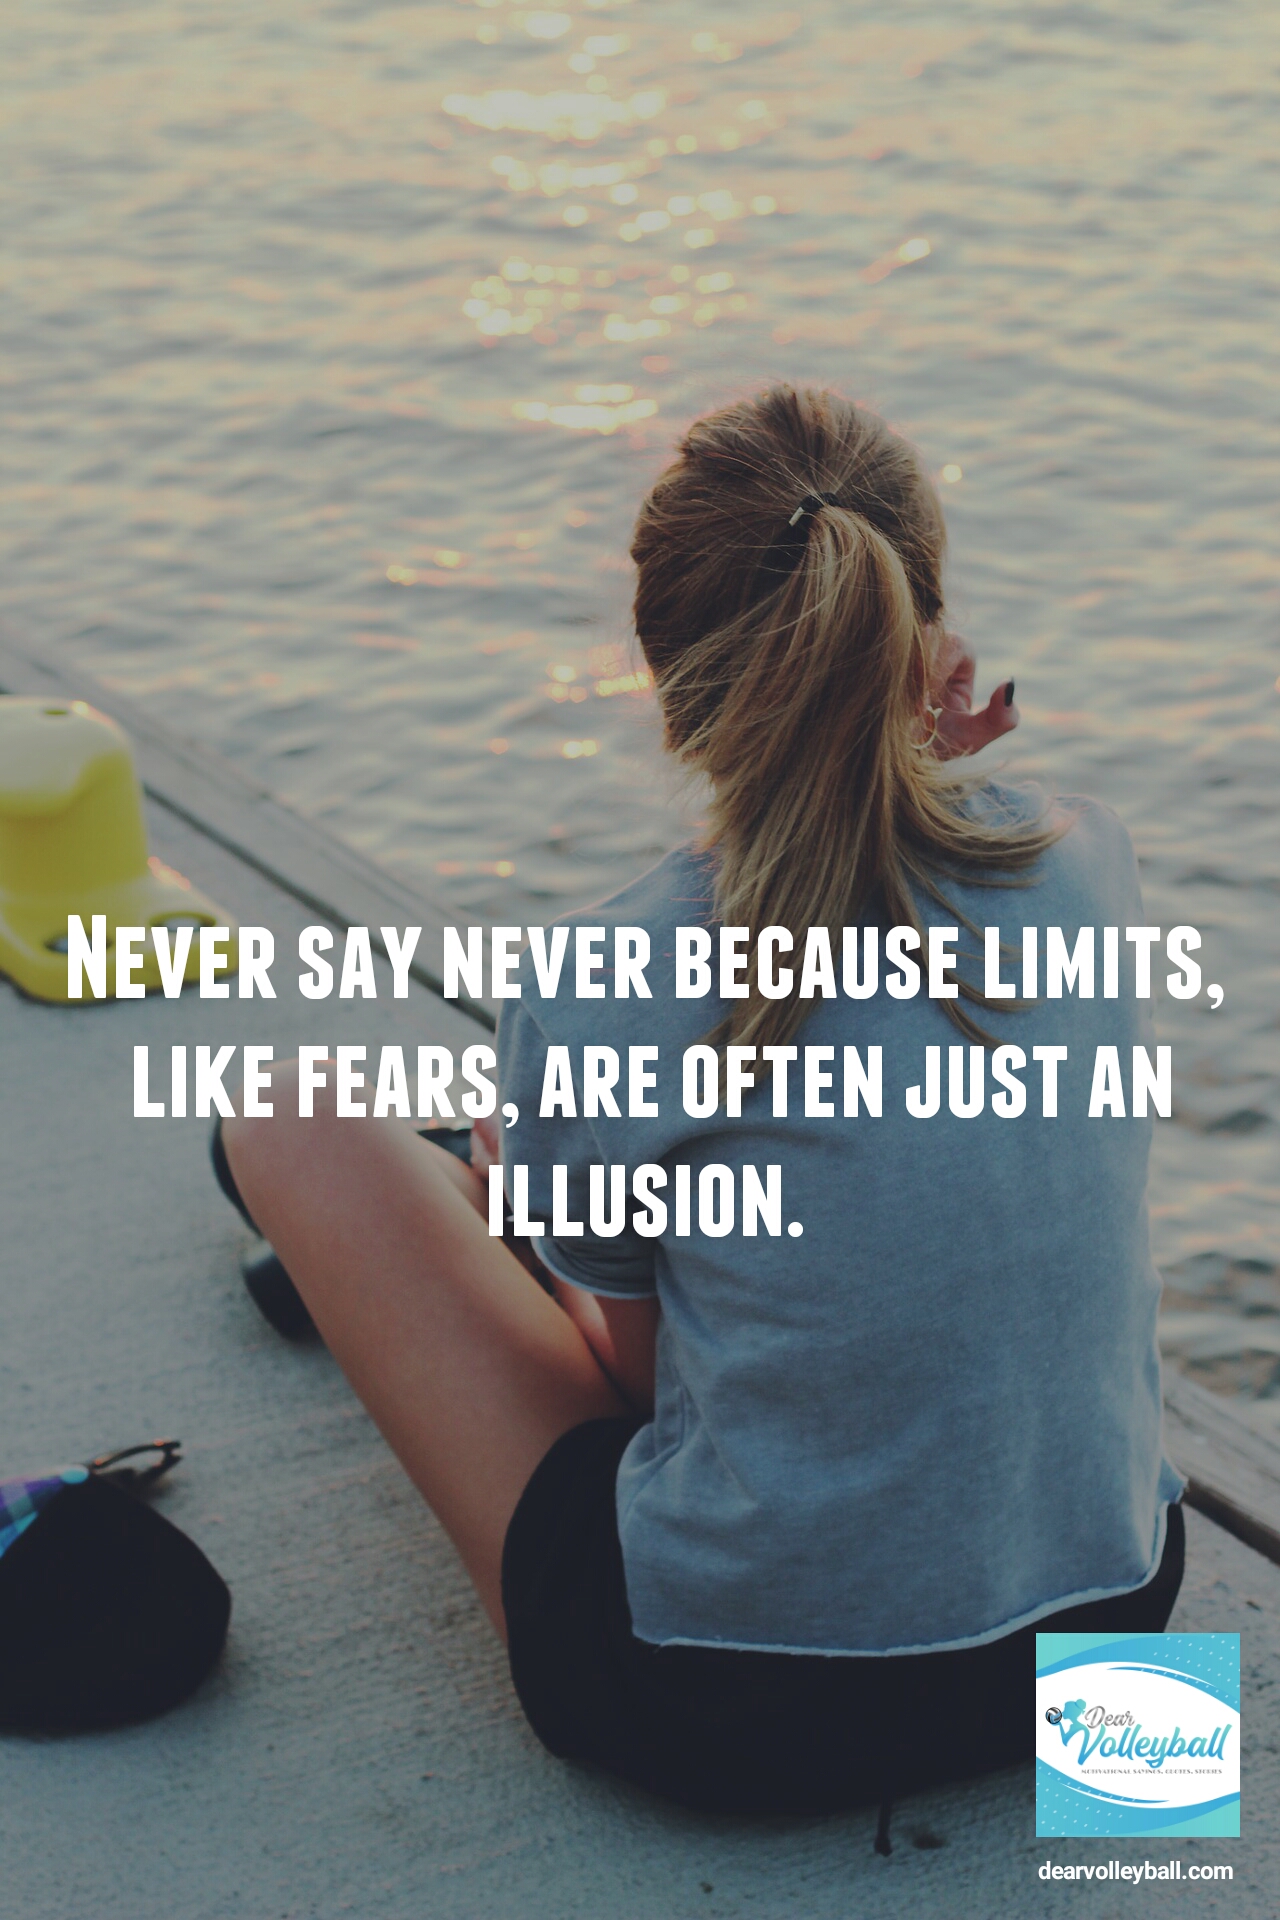 Never say never because limits like fears are just an illusion and other encouragement quotes on DearVolleyball.com